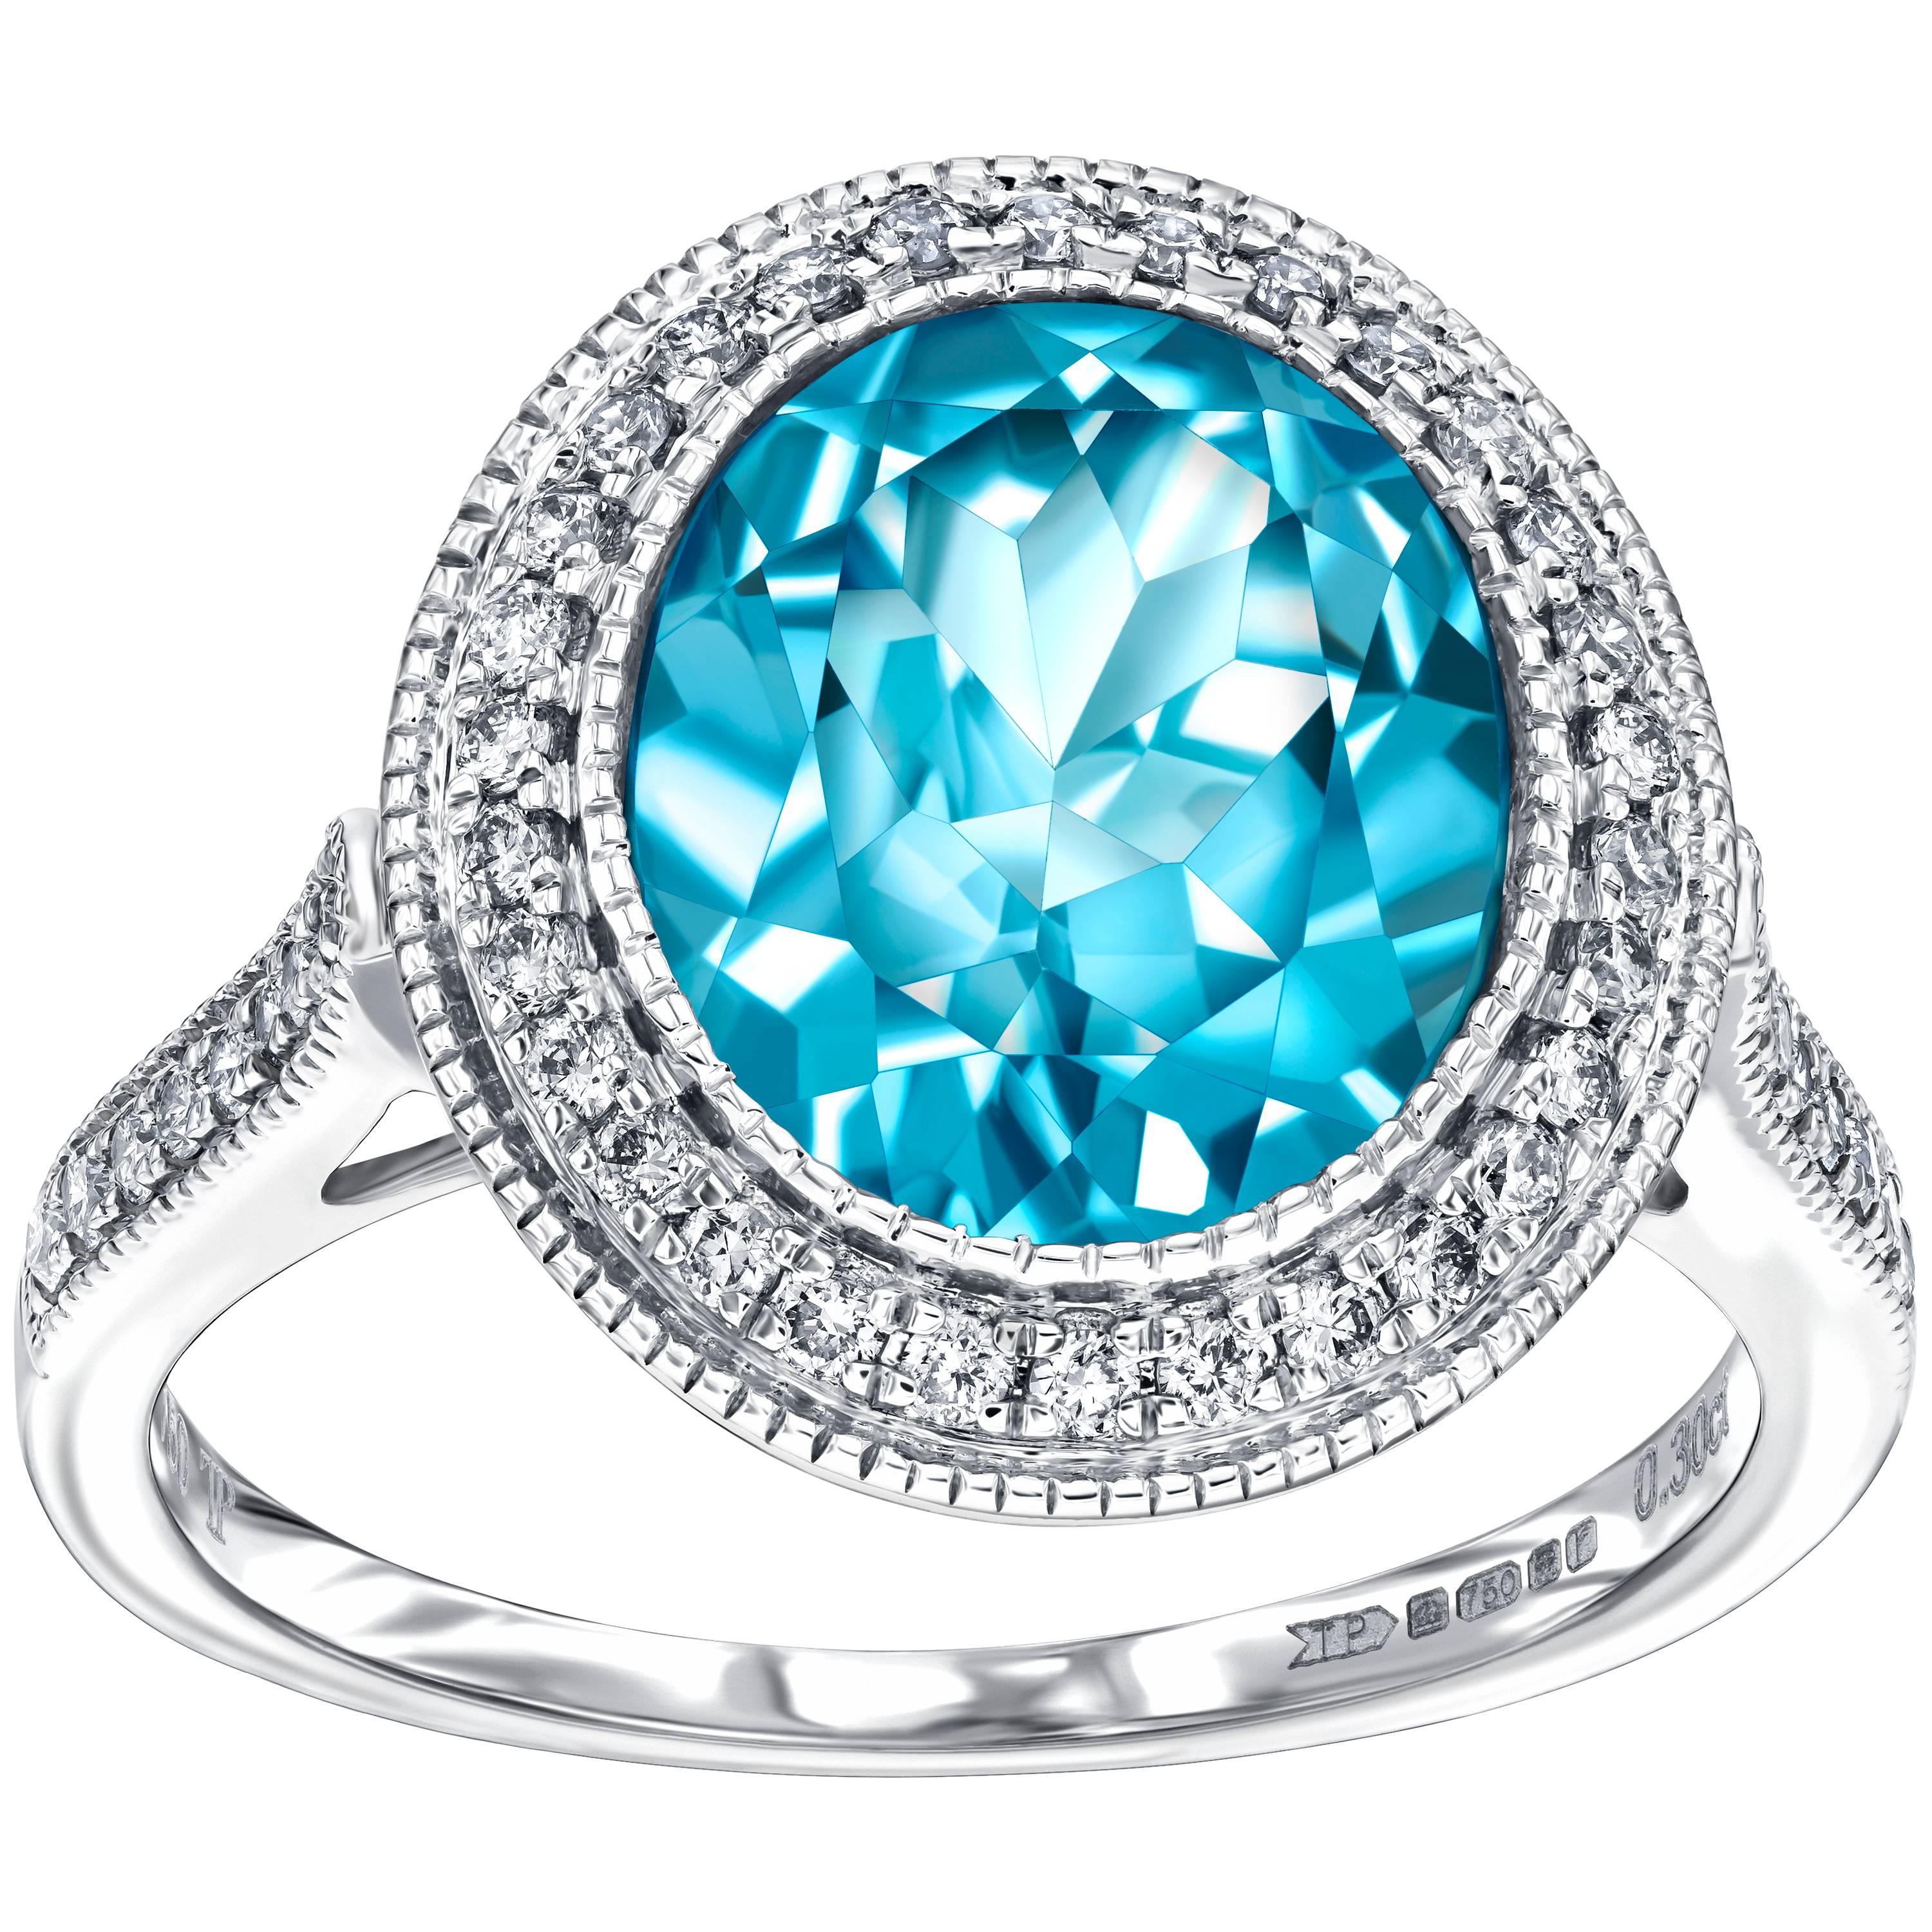 This Contemporary 4.50 Carat Blue Topaz Oval Cut Engagement Ring featuring 0.33ct Round Brilliant H-SI Diamonds which are accentuated on the shoulders. This ring has a total gem weight of 4.83 carats. With a quality grading of H-SI the weight of the